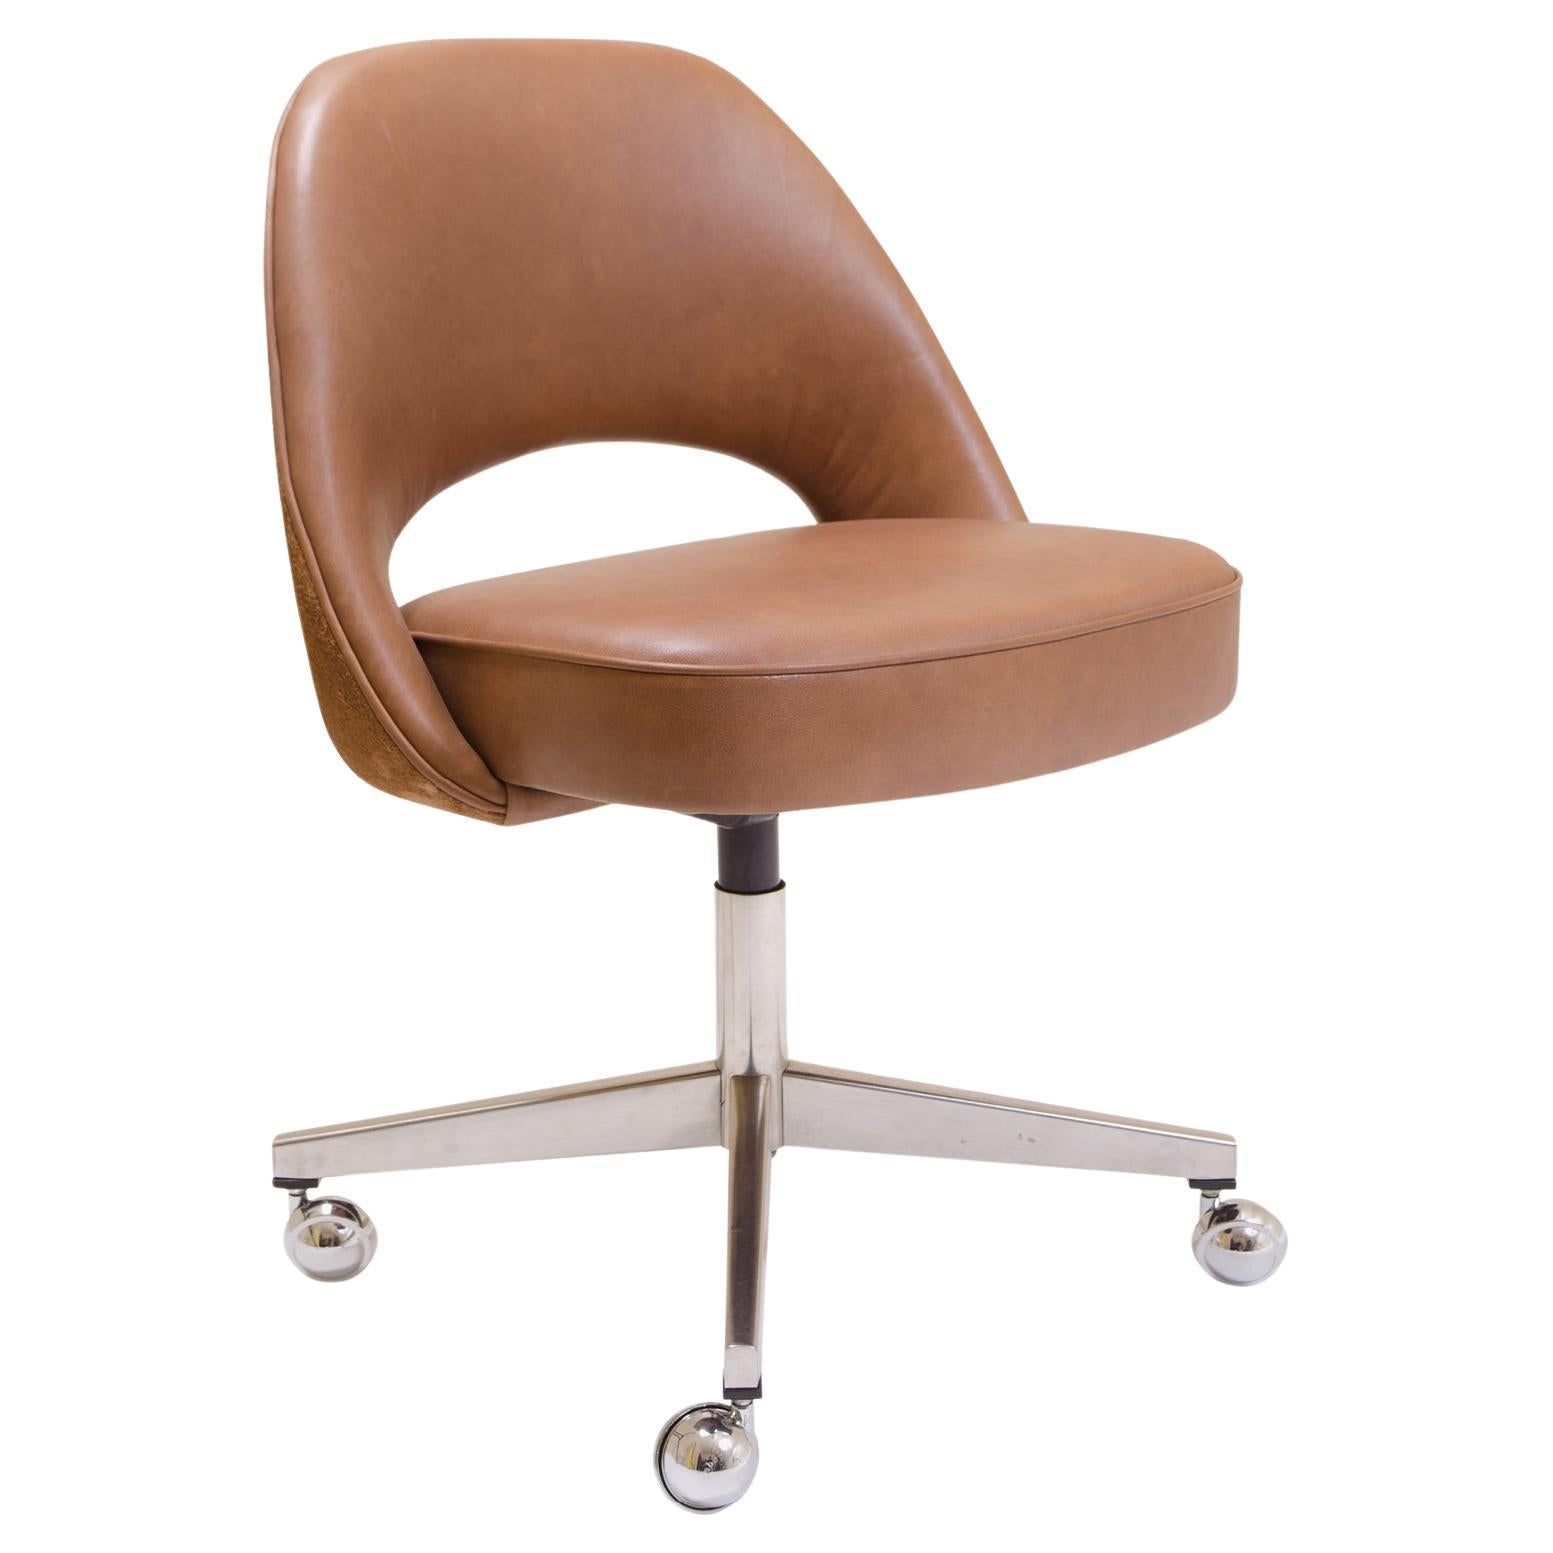 Saarinen Executive Armless Chair in Leather and Suede, Vintage Swivel Base For Sale